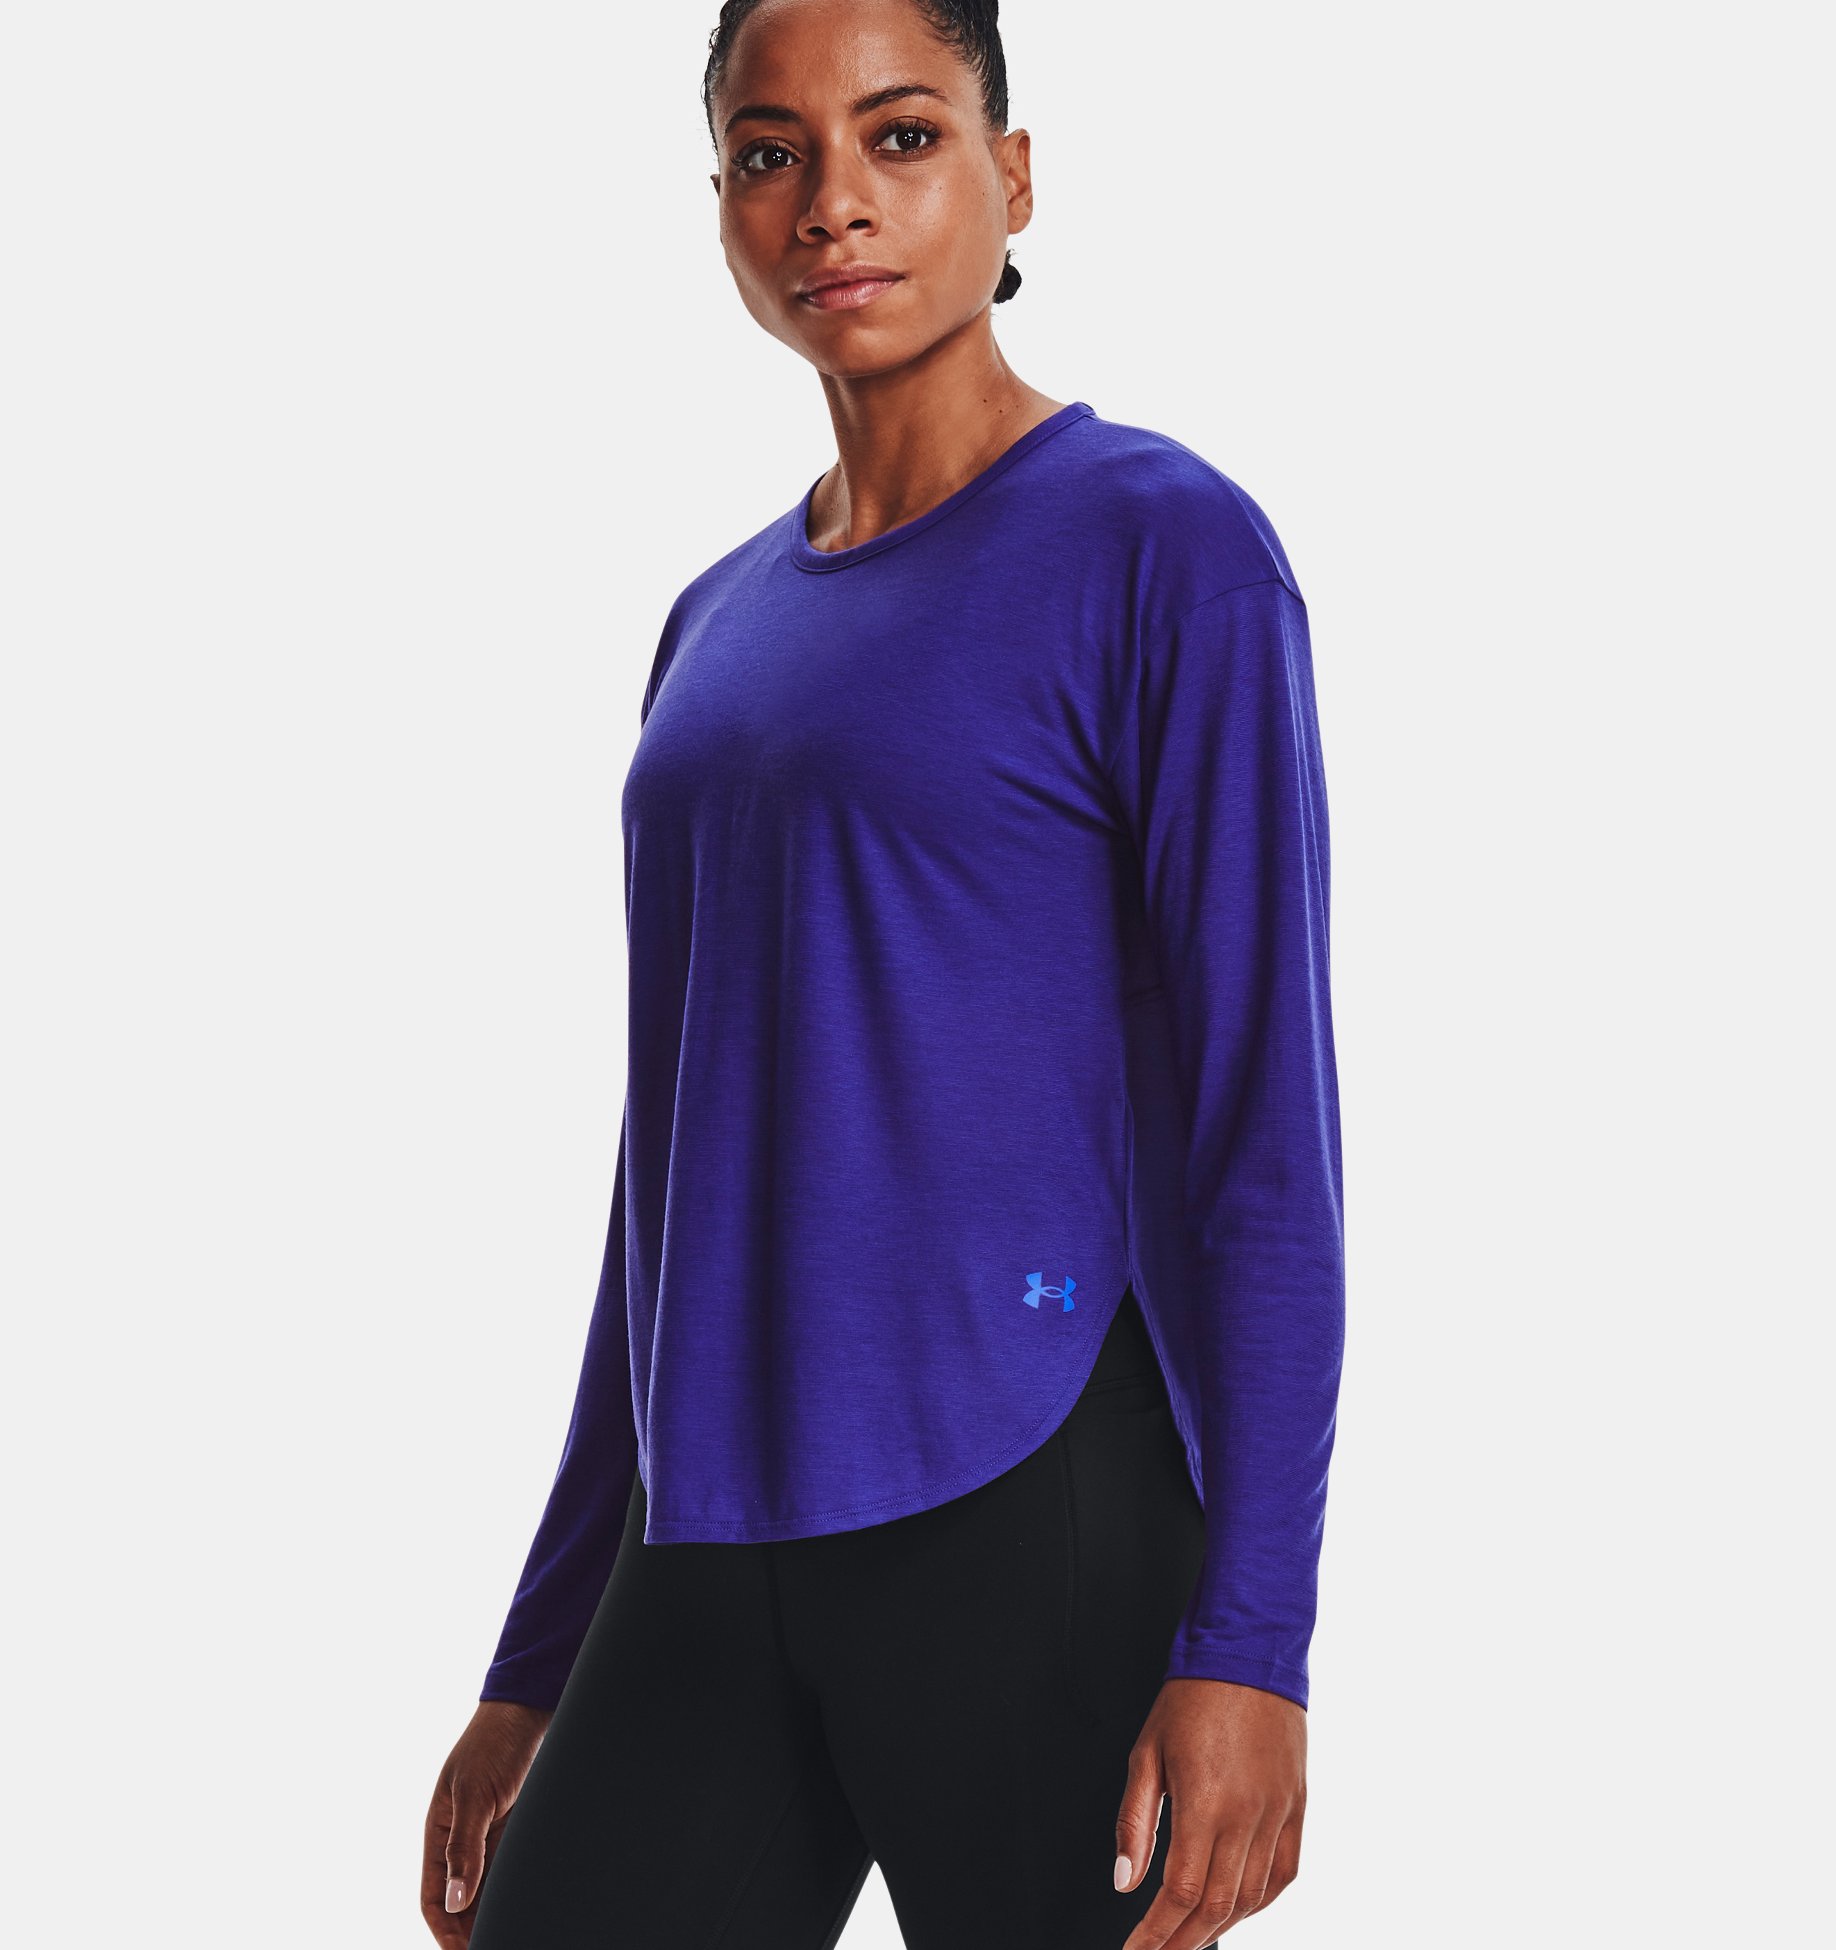 Under Armour Women's UA Breathe Long Sleeve Lightweight Top (various colors) $17 + free shipping